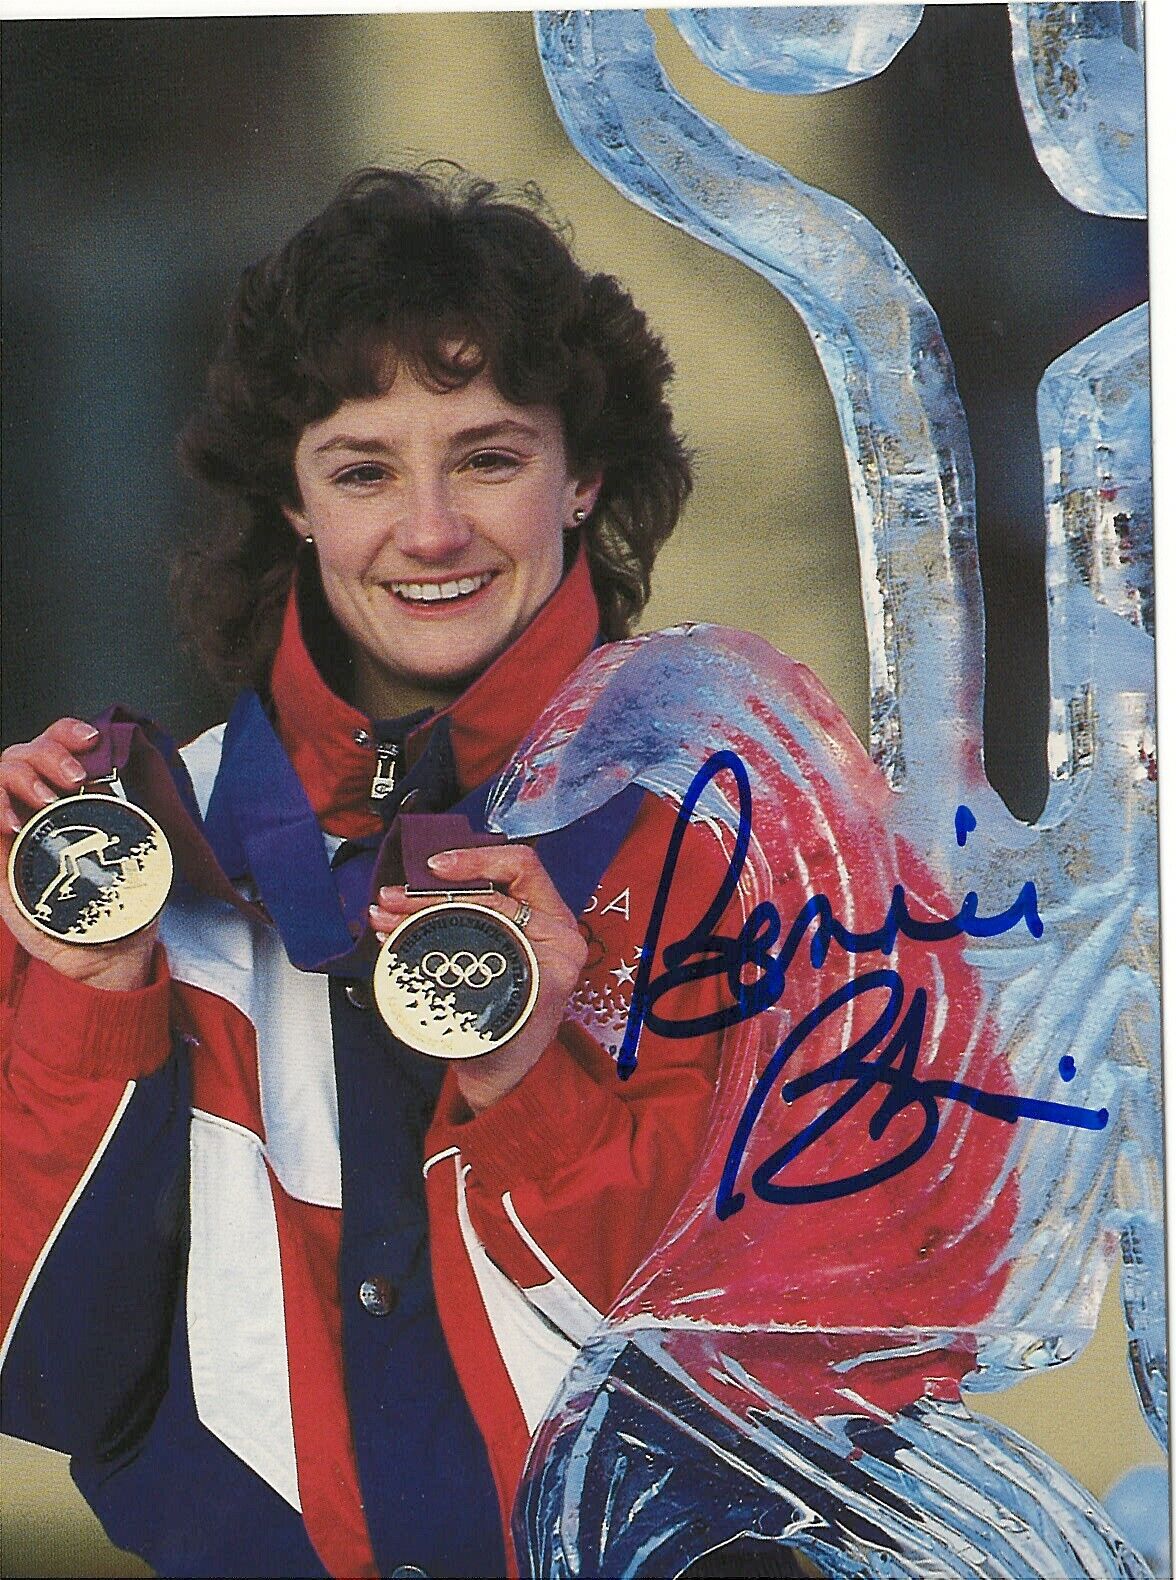 BONNIE BLAIR WINTER OLYMPICS SPEED SKATER 5X GOLD MEDAL WINNER RARE SIGNED Photo Poster painting